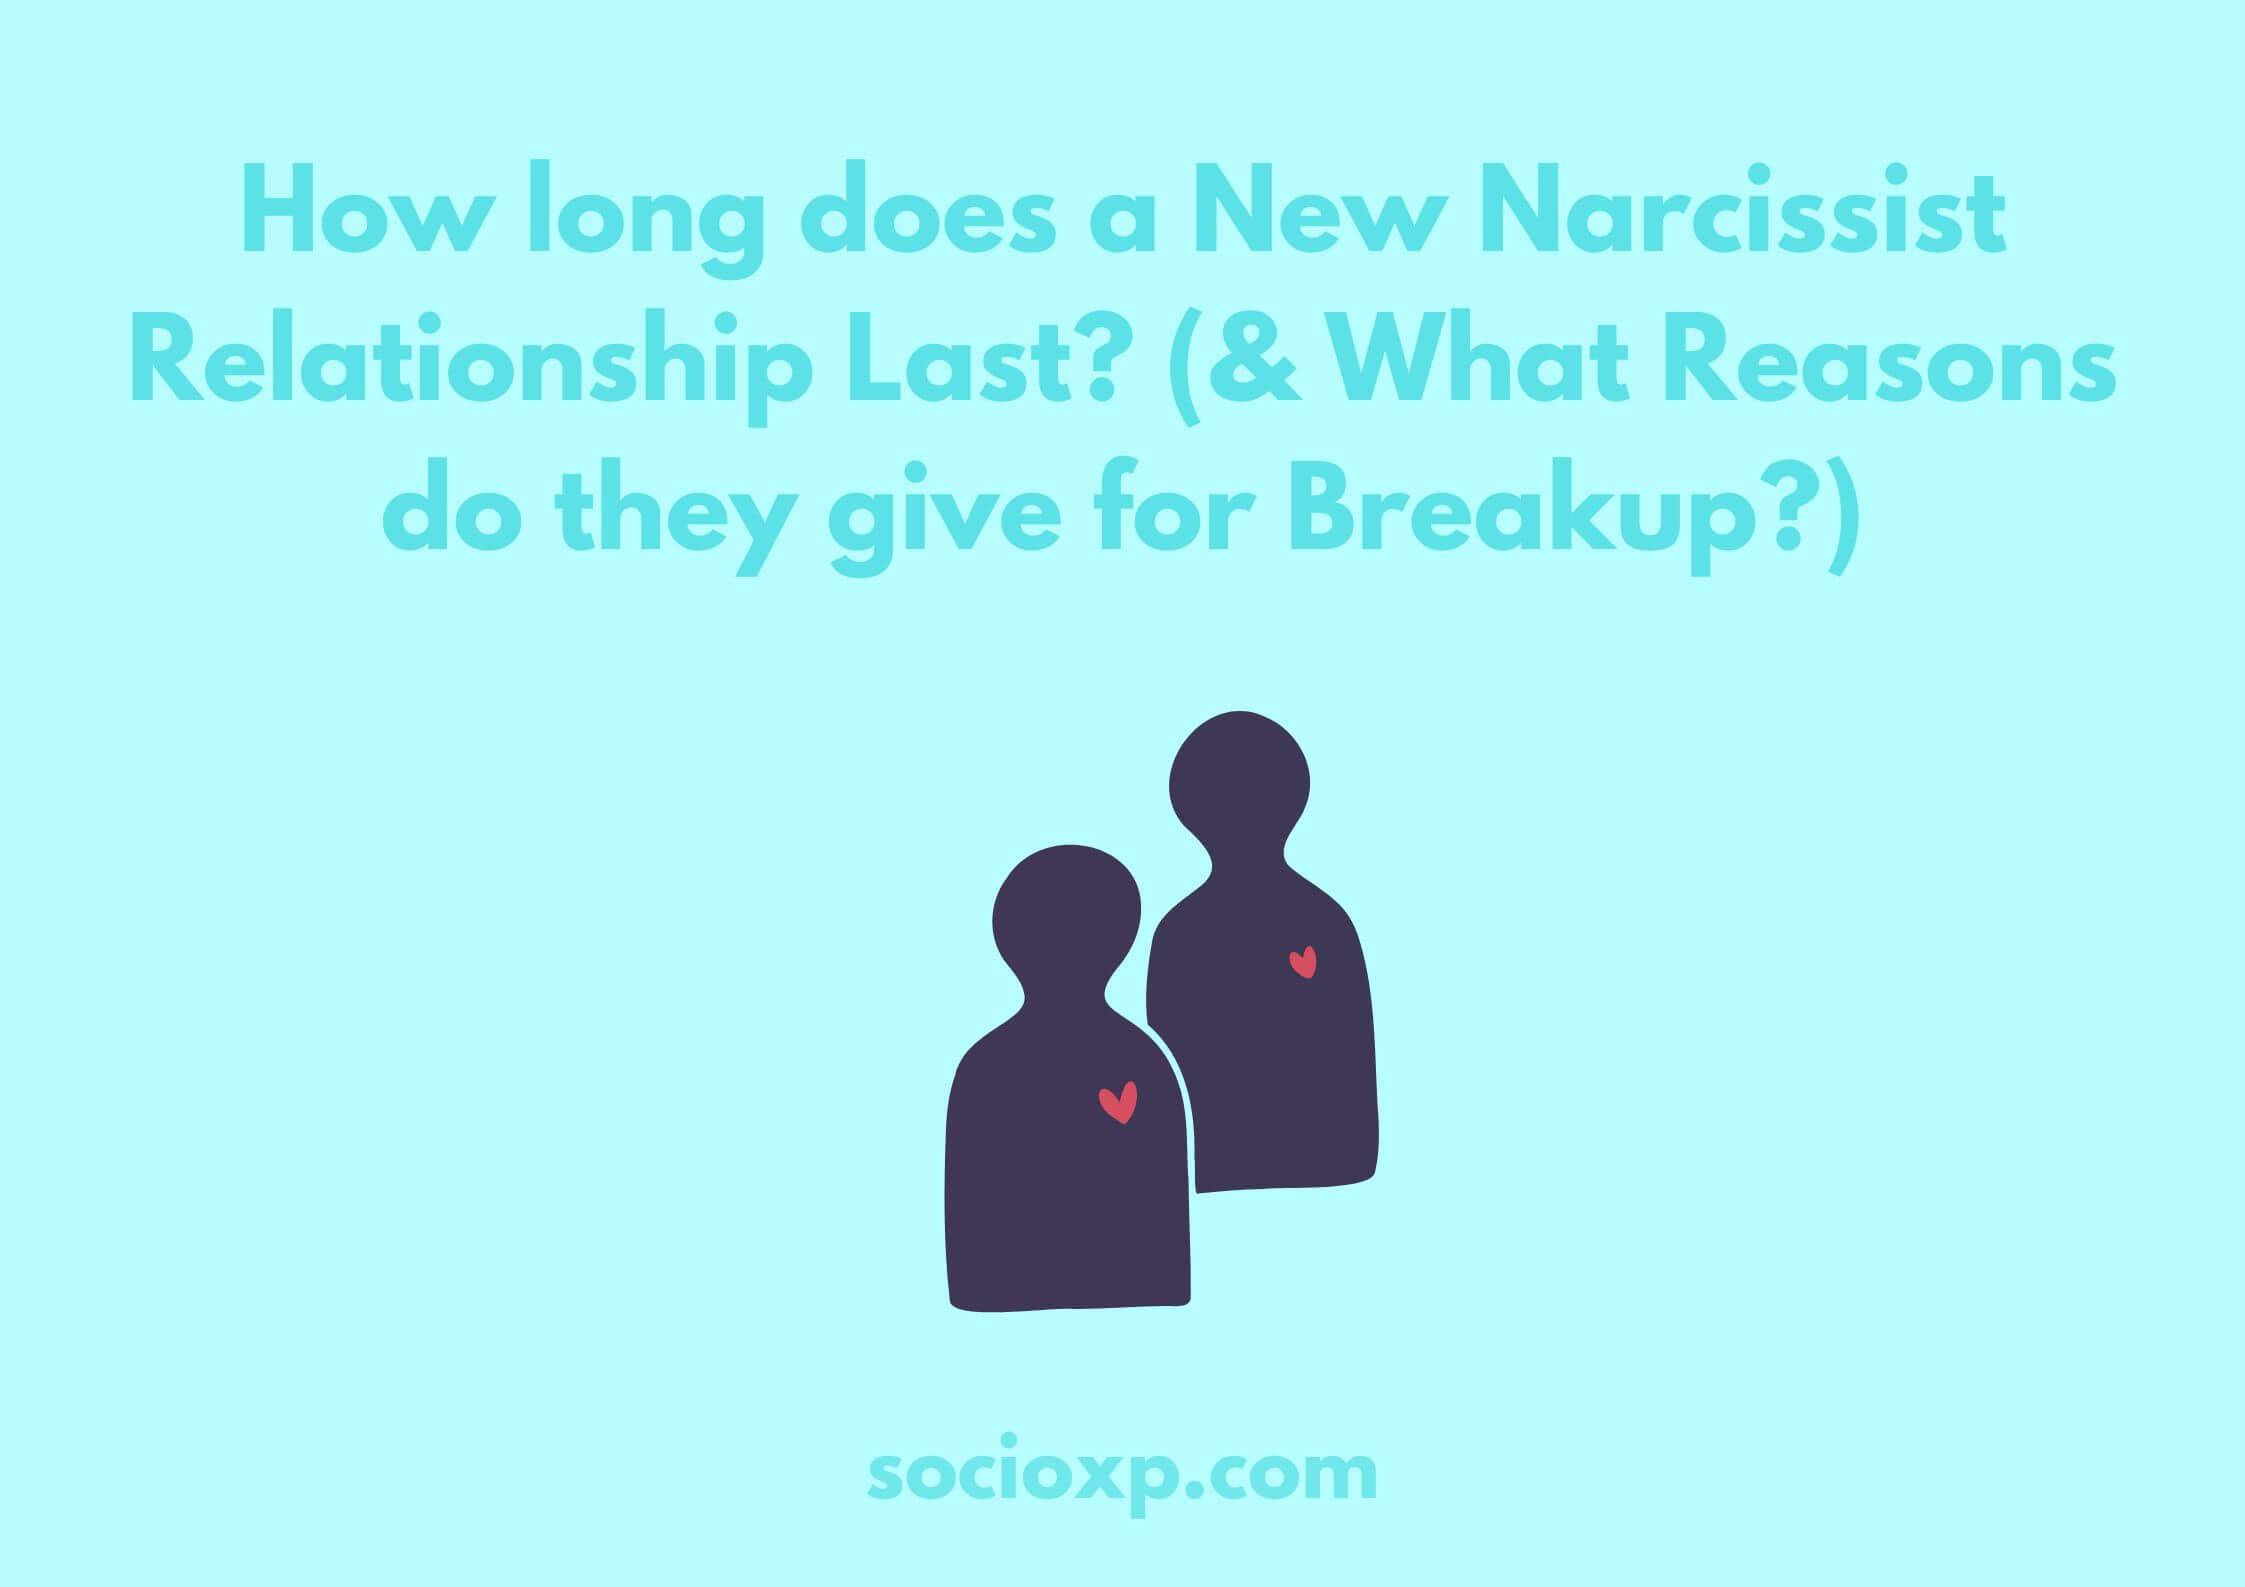 How Long Does A New Narcissist Relationship Last? (& What Reasons Do They Give For Breakup?)